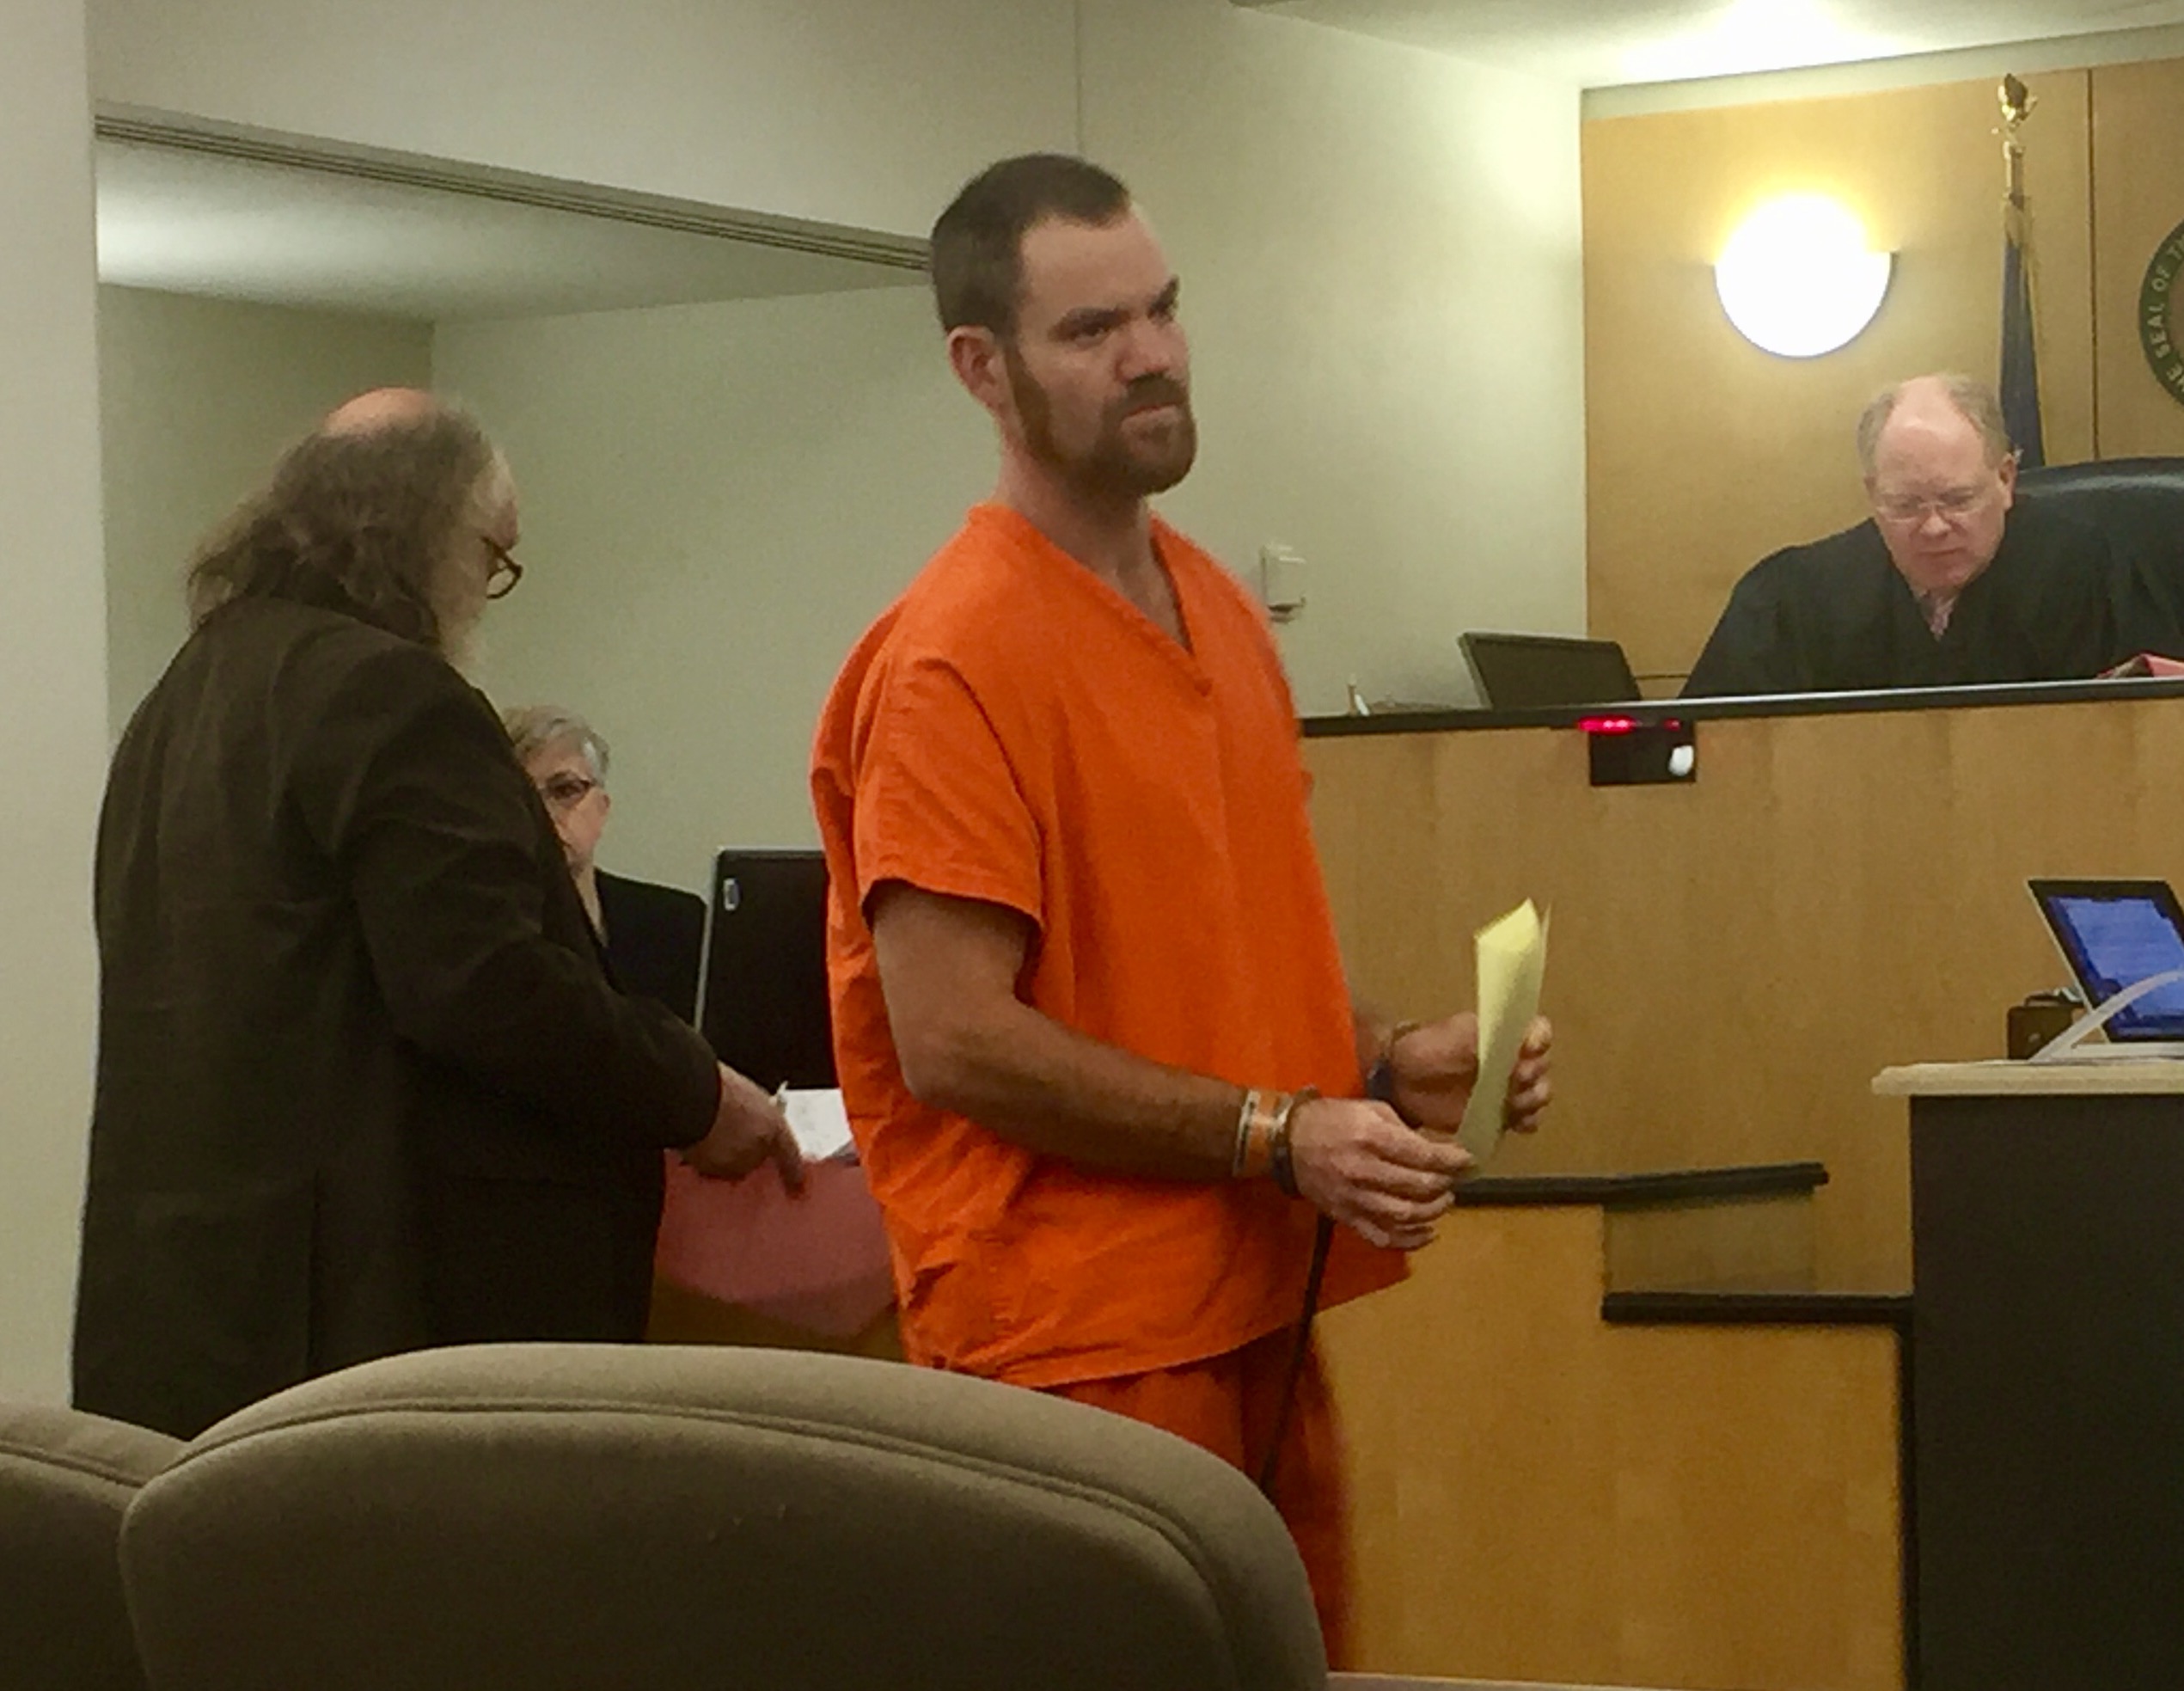 Man accused in Wal Mart shooting arson pleads not guilty The Columbian